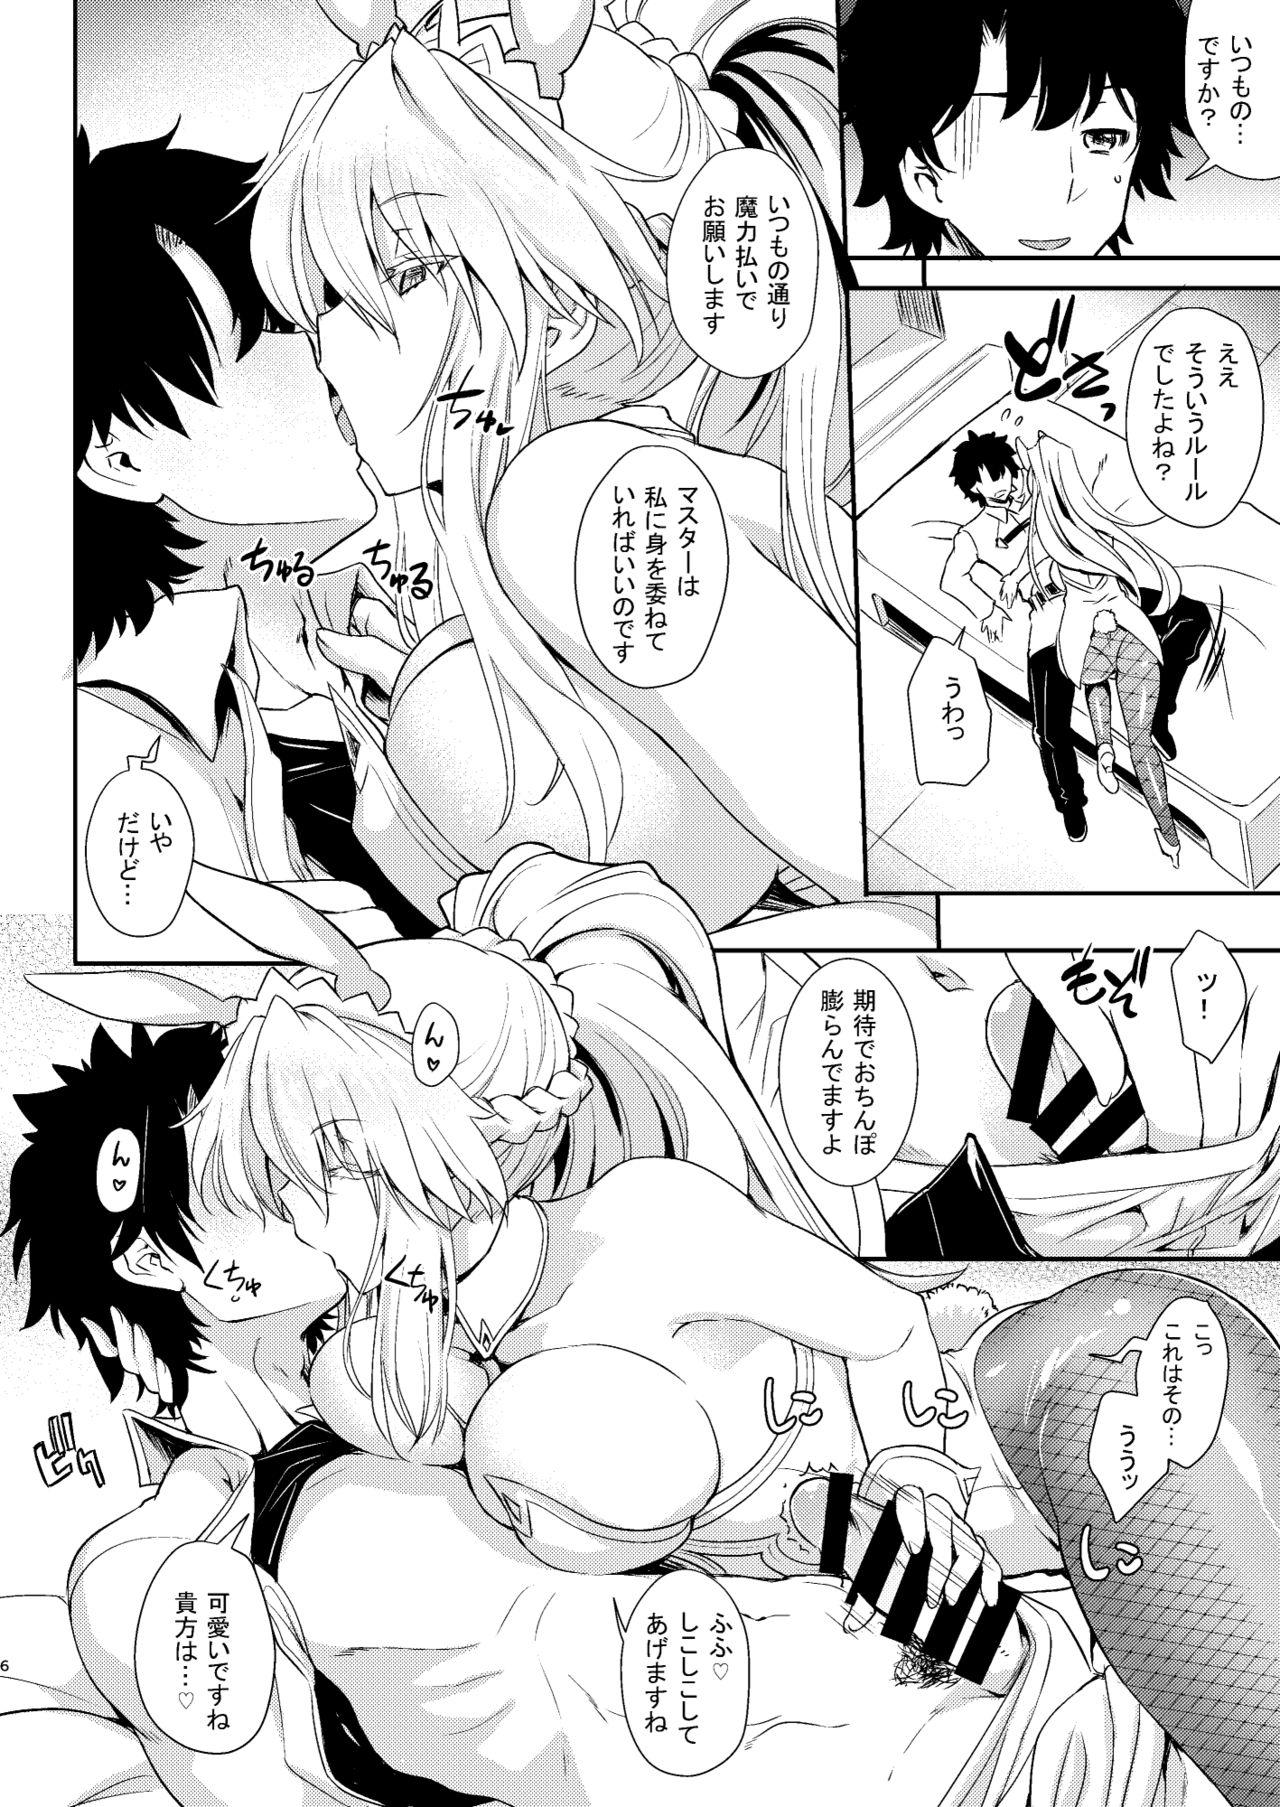 Outside Place your bets please - Fate grand order Blowjob - Page 6